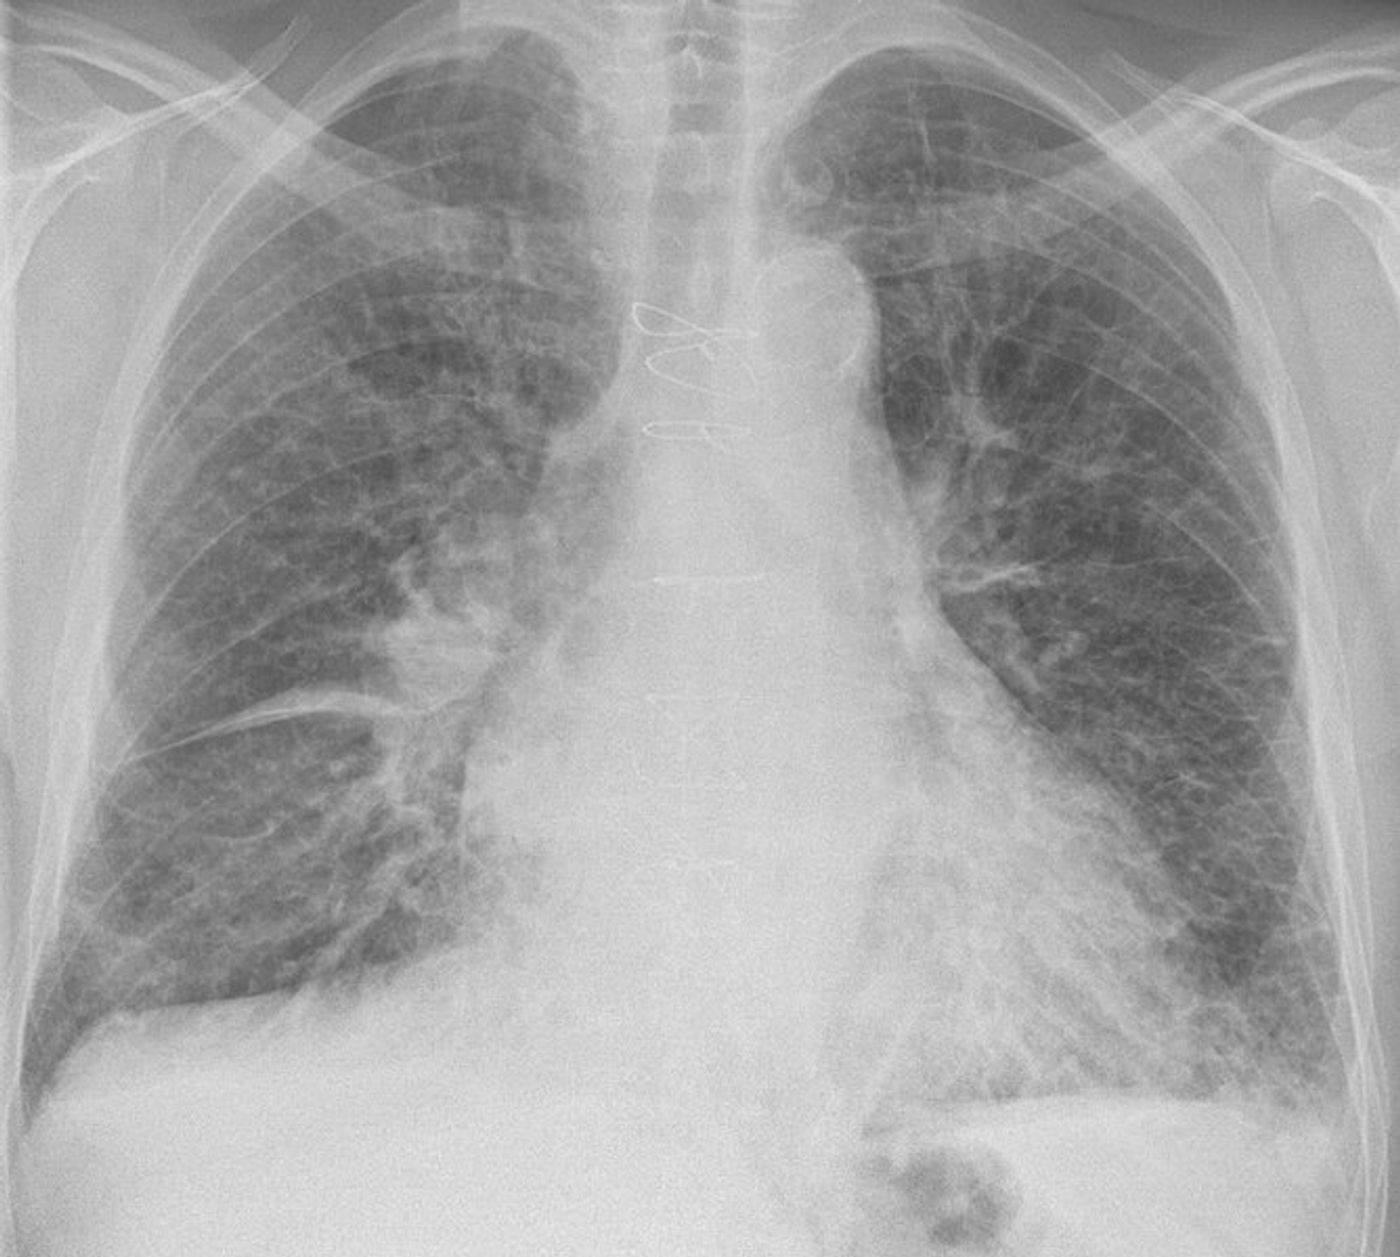 Chest radiograph of an 83 year old man with previous coronary artery bypass surgery indicating intermediate congestive heart failure.